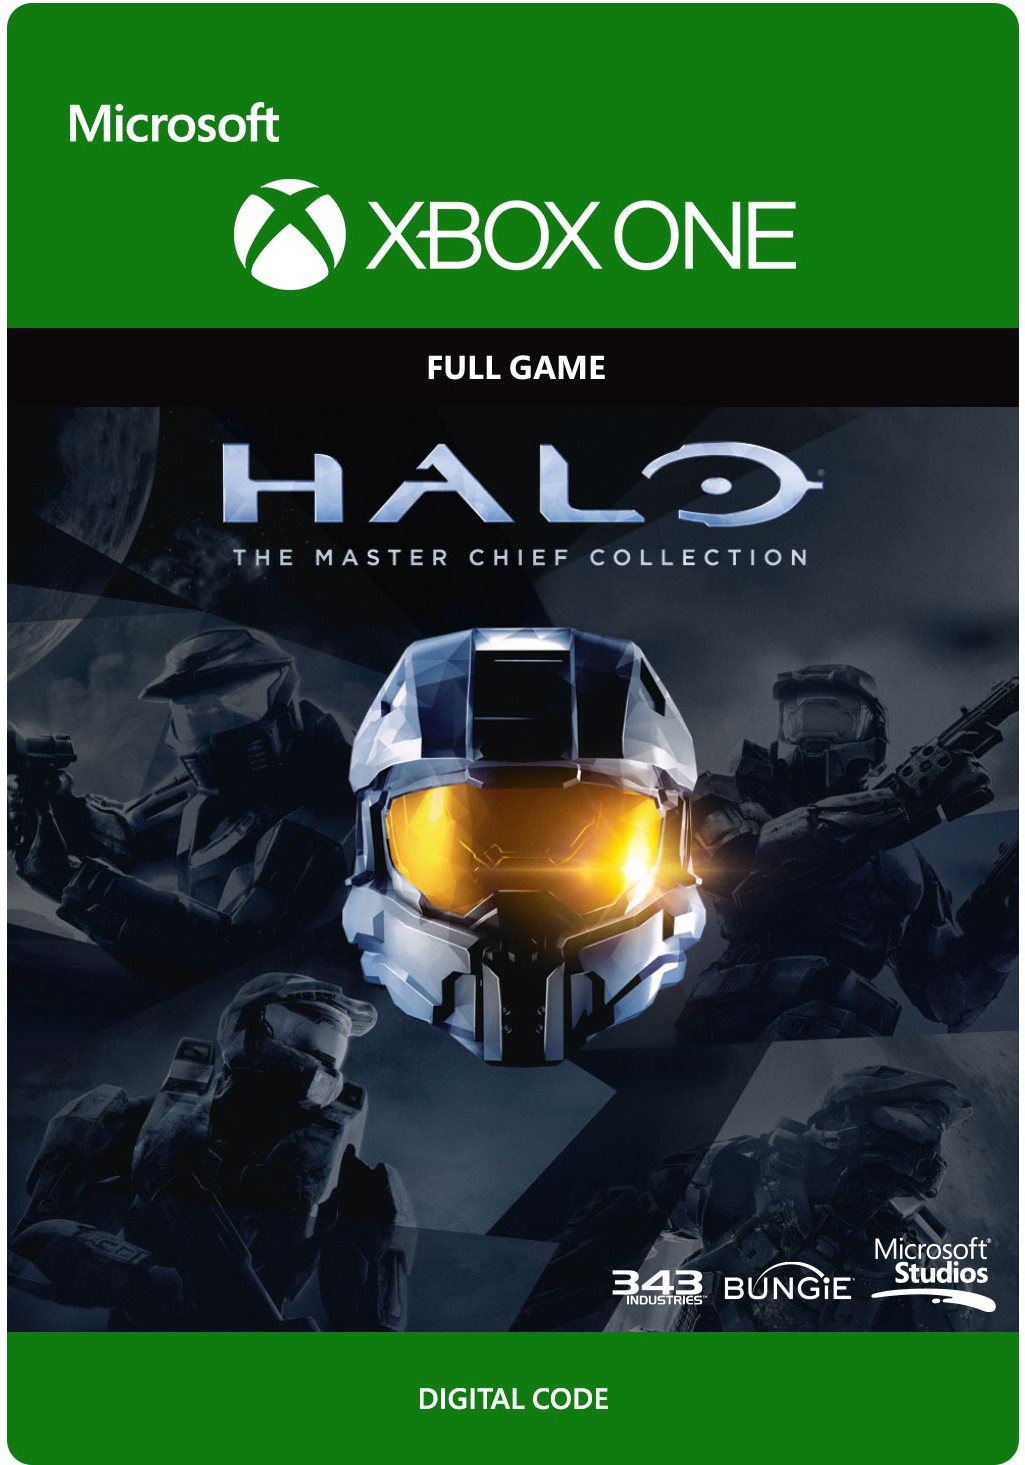 Halo: The Master Chief Collection - Xbox One DIGITAL